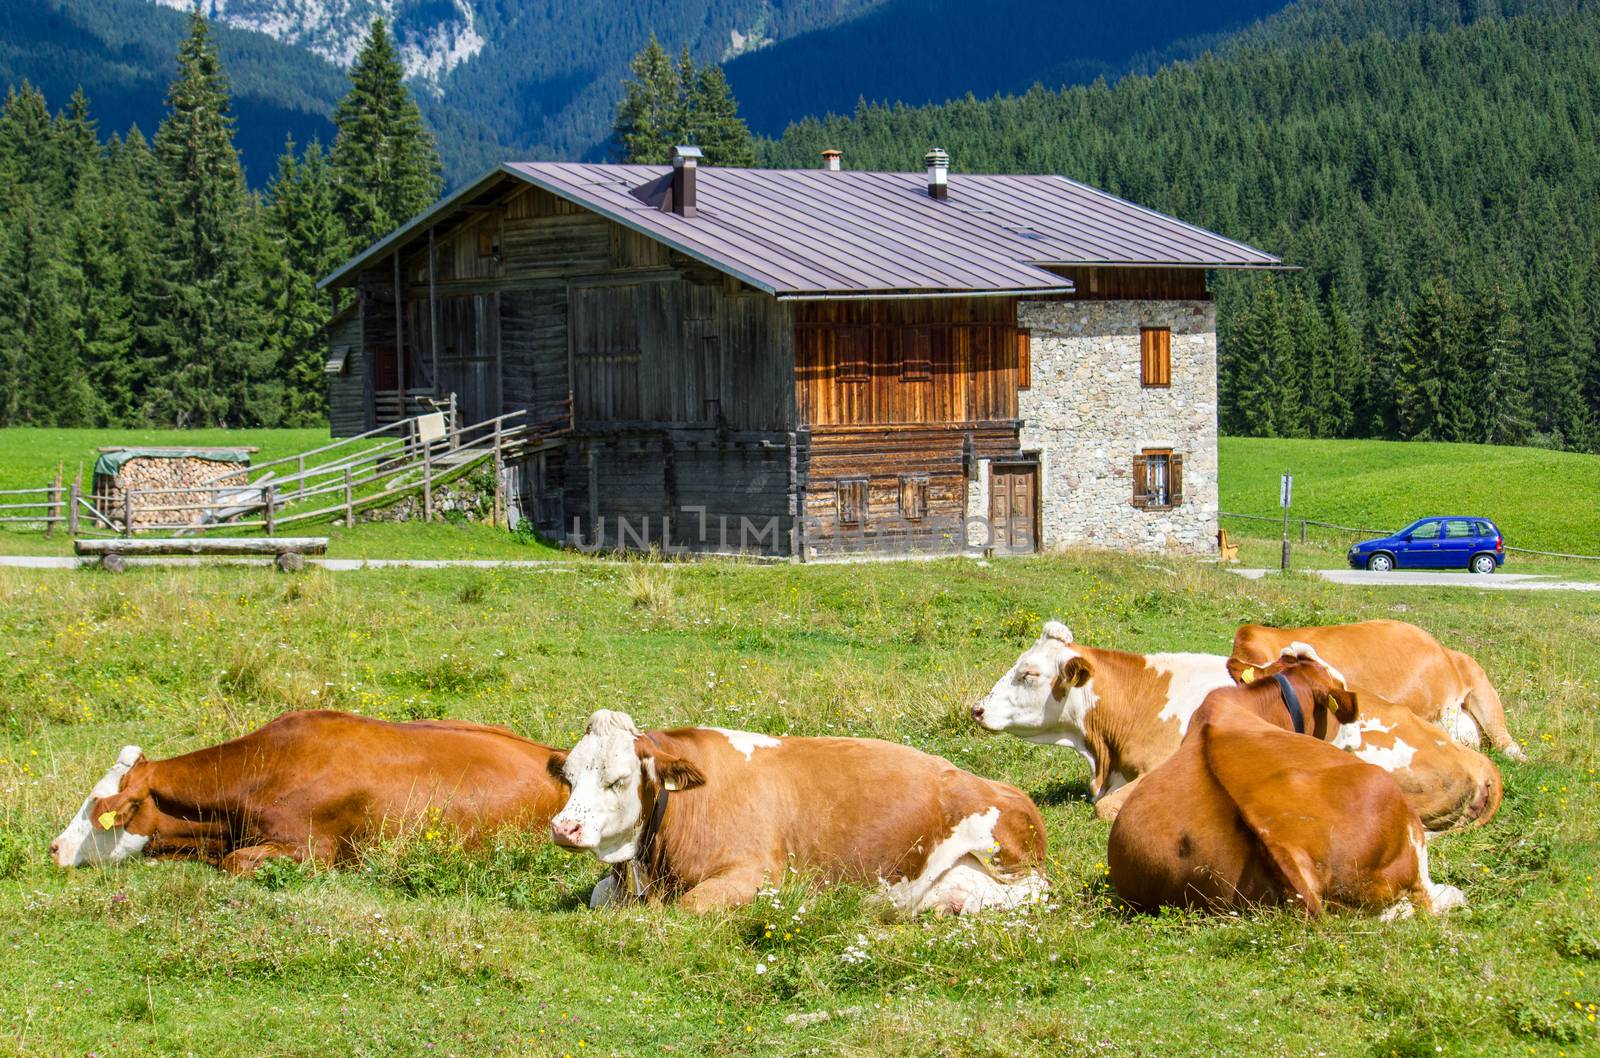 Cows grazing on a green summer meadow with hut in background.